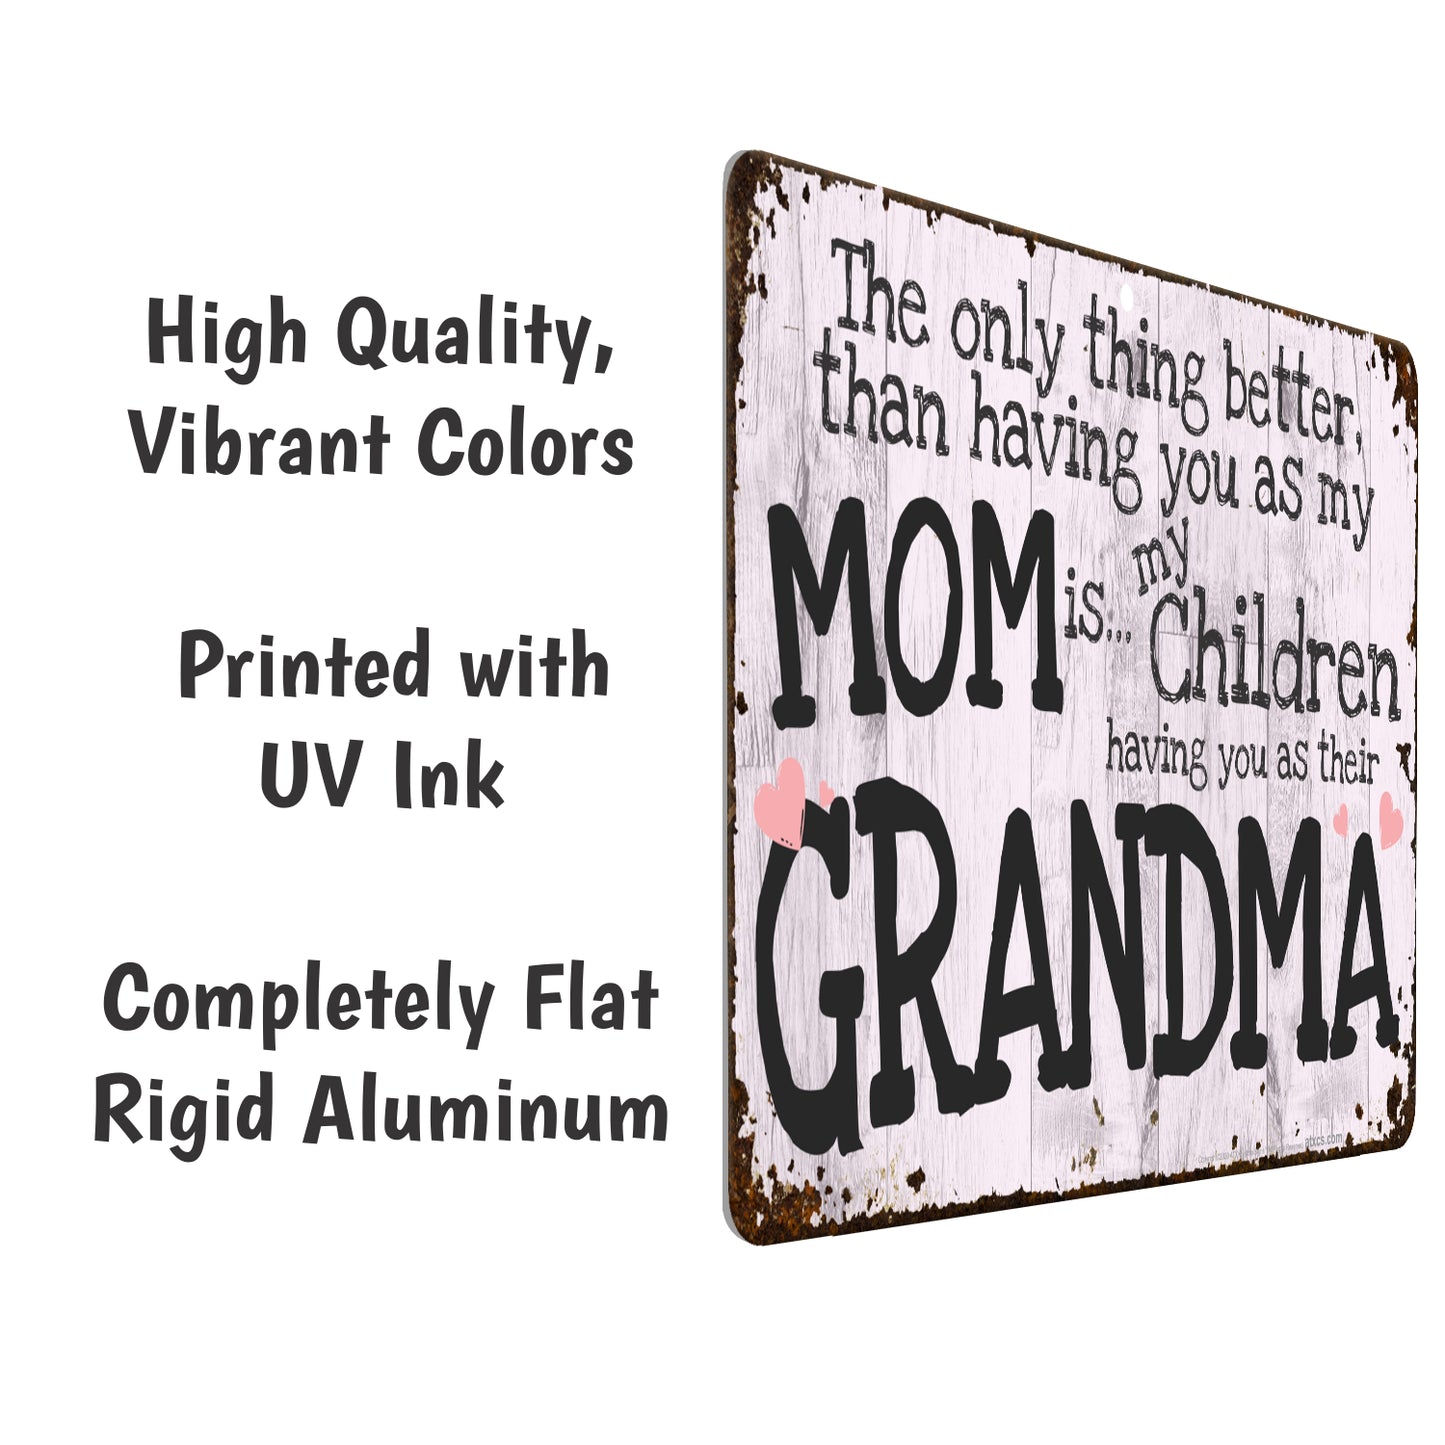 We Love you Grandma and Mom Sign The Only Thing Better Than Having You As My Mom Is My Children Having You As Their Grandma - Size 8 x 12